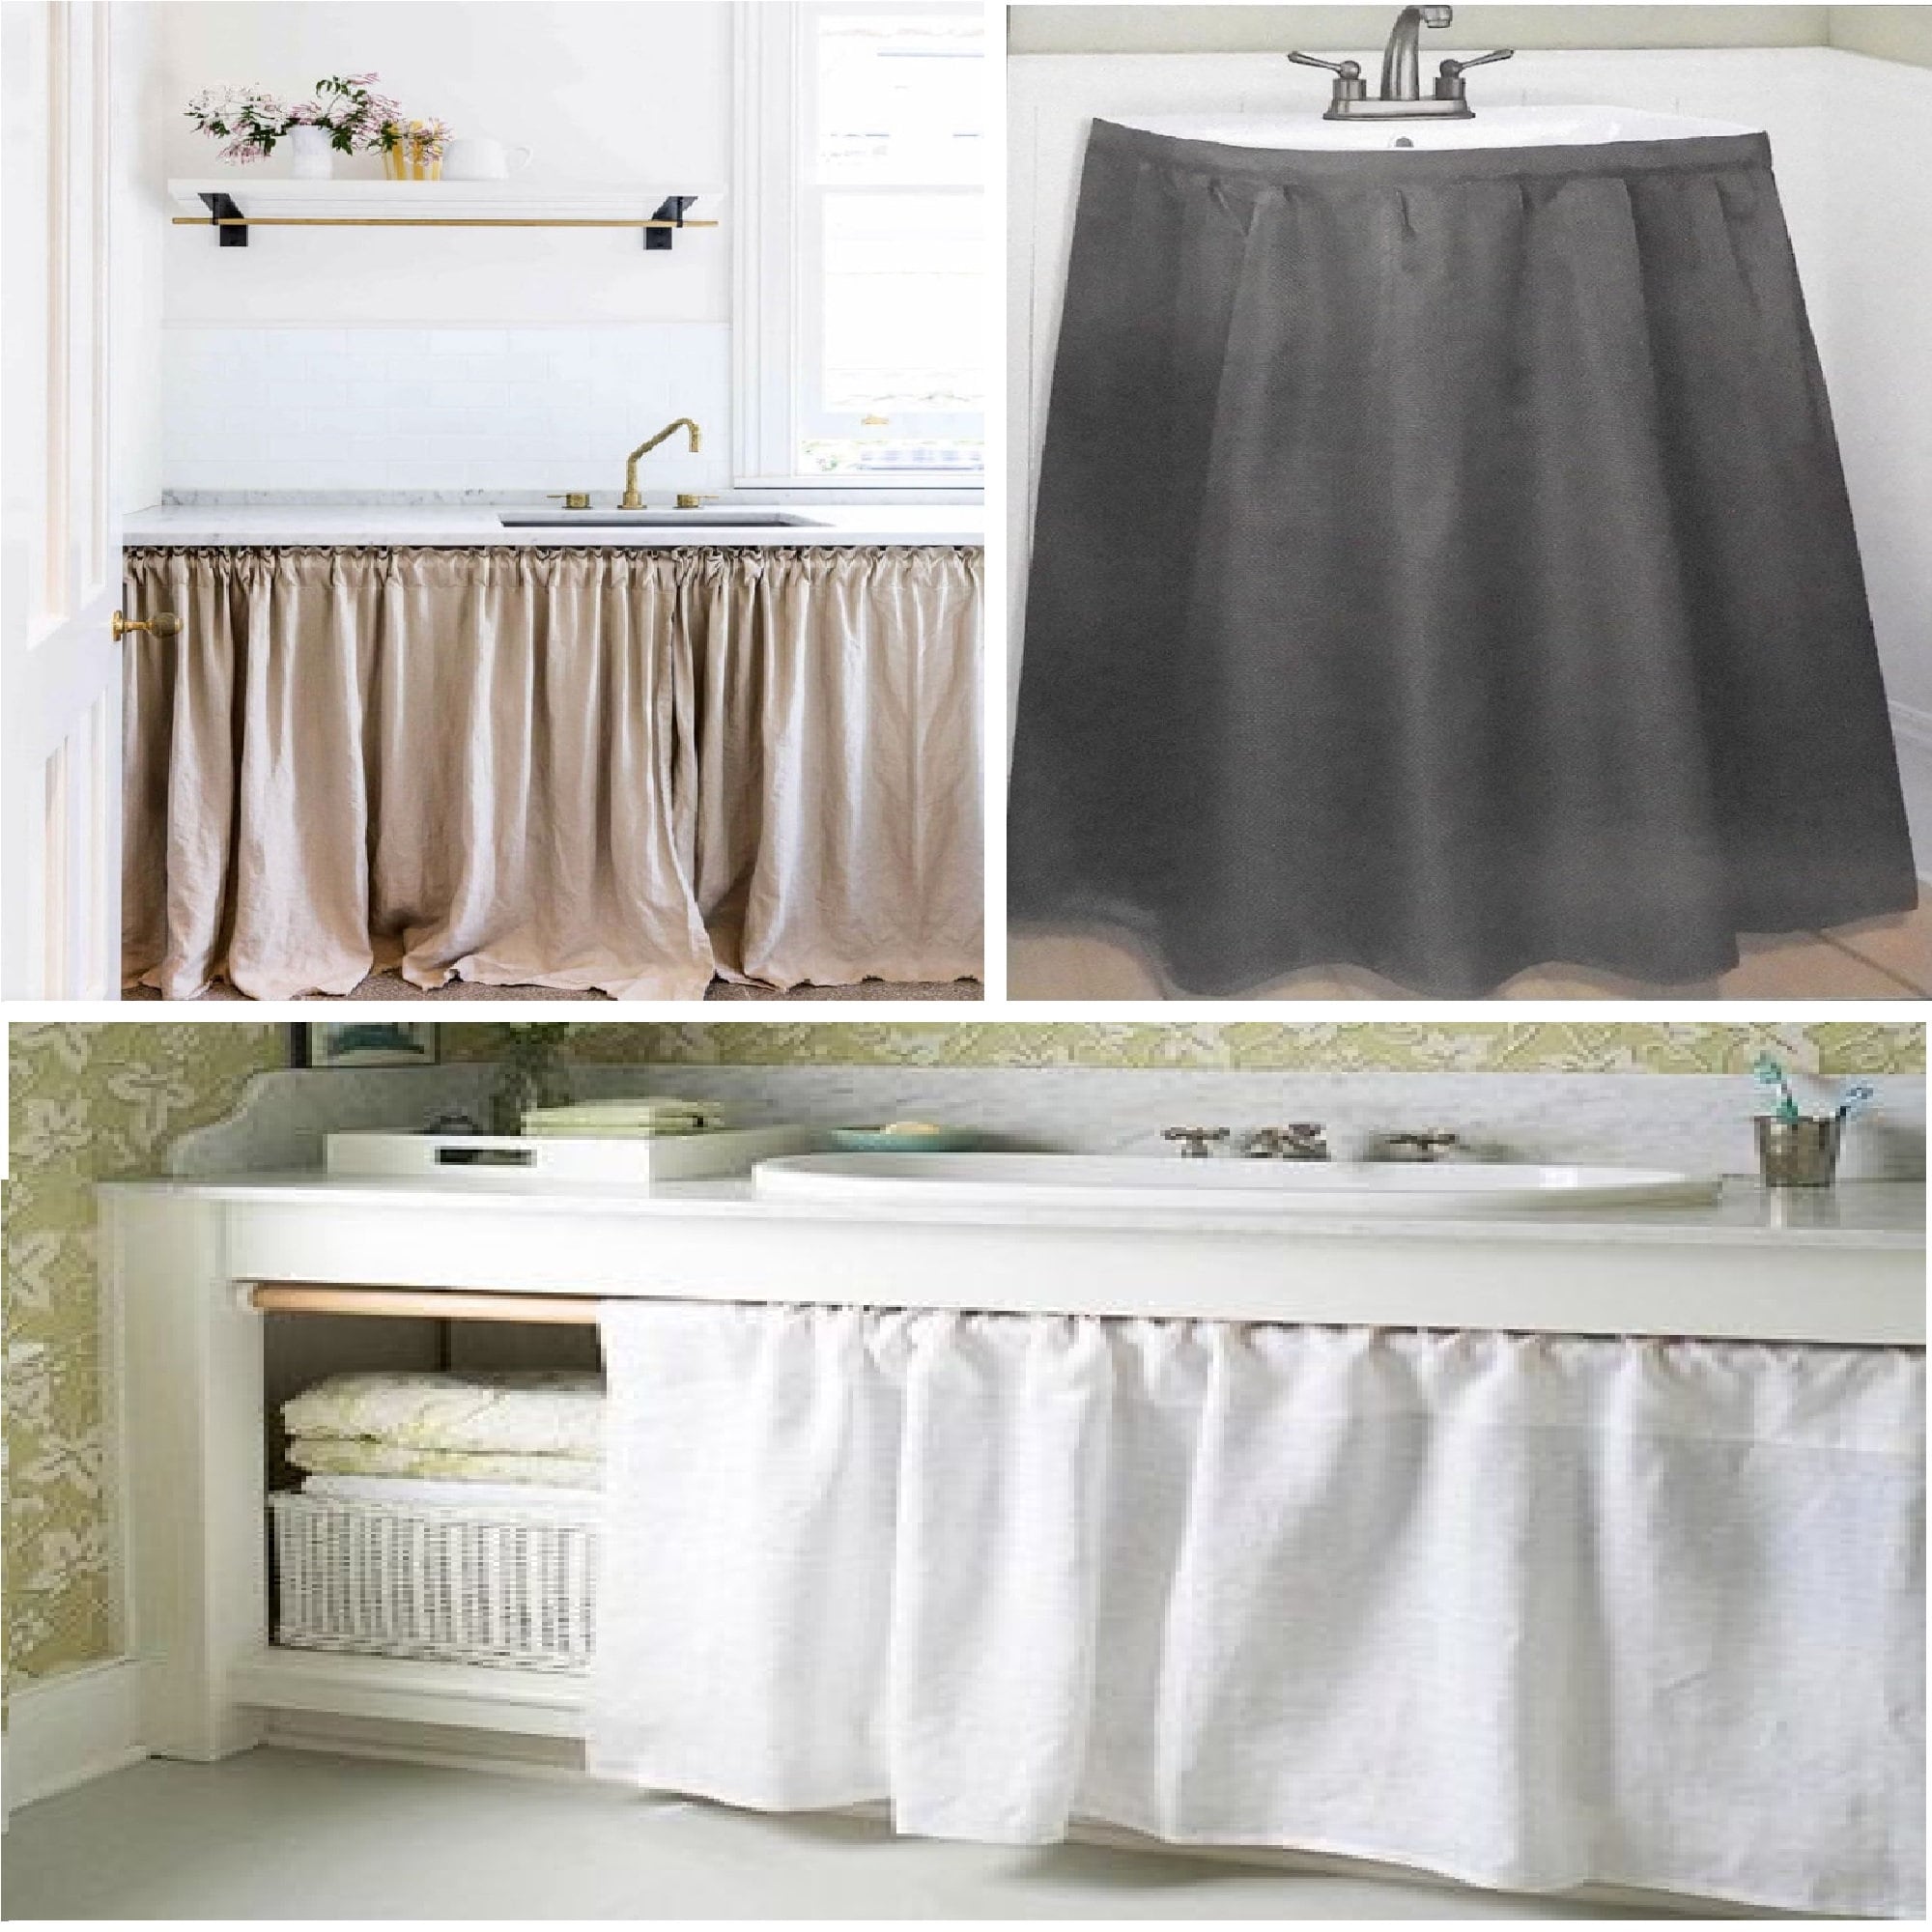 Sink Skirt With Velcro/ Sink Skirt for Bathroom or Kitchen